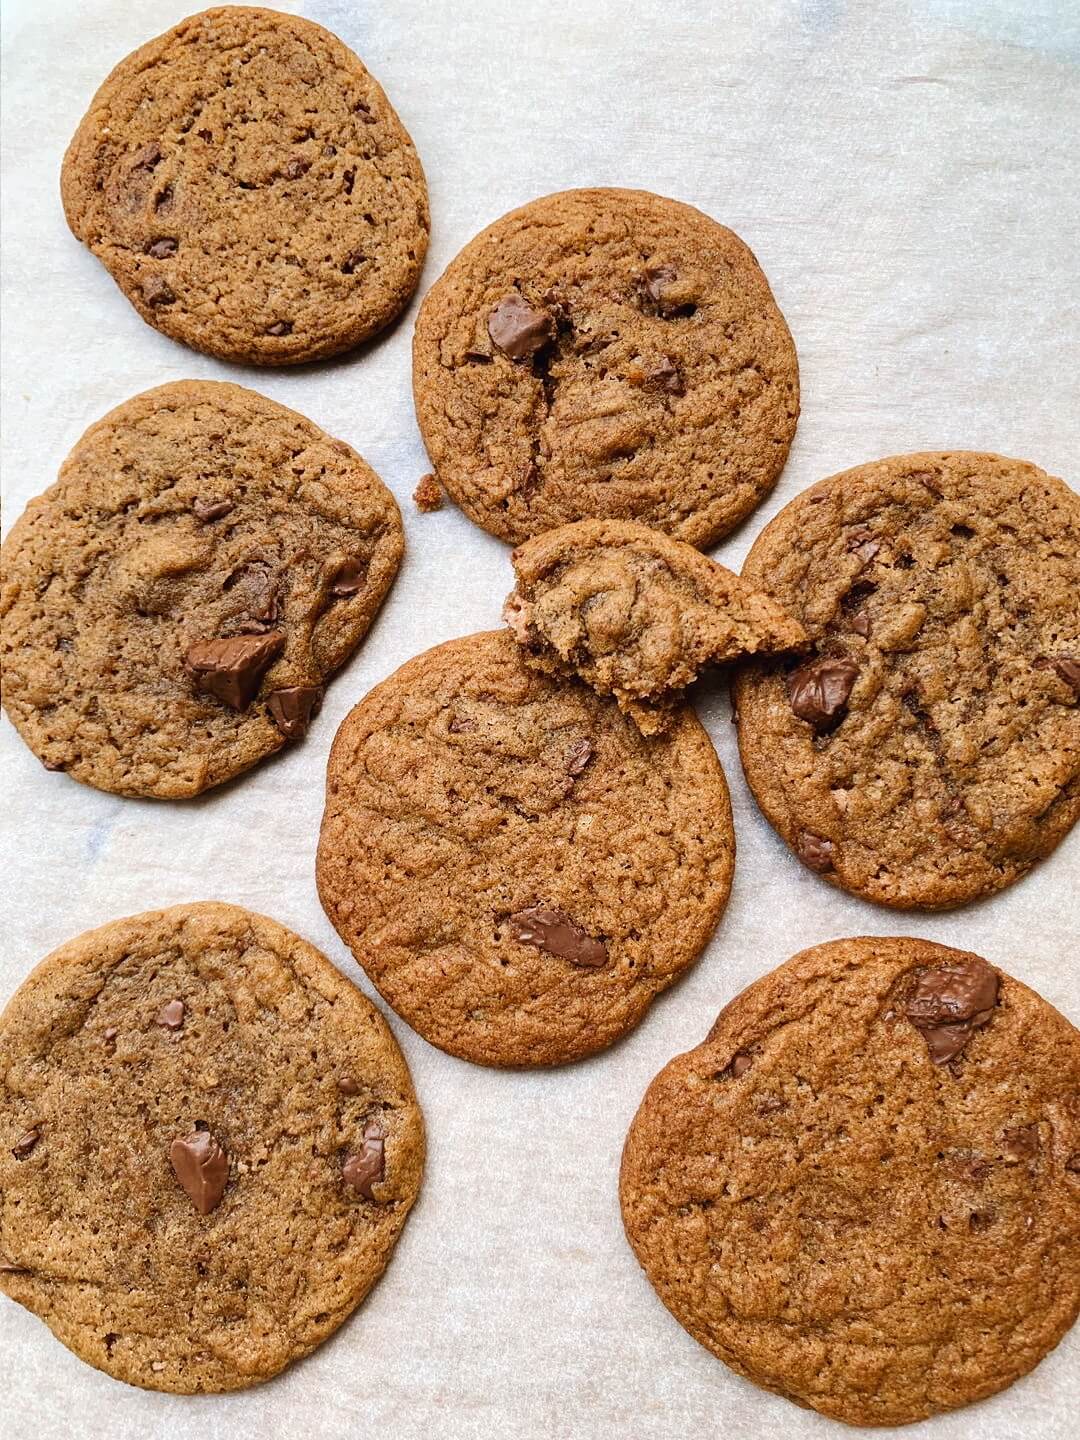 Chocolate Chip Cookies that are Vegan. Chewy, Crispy, Thin, and contain no coconut oils or vegan butter! A recipe by Heather of imheatherr.